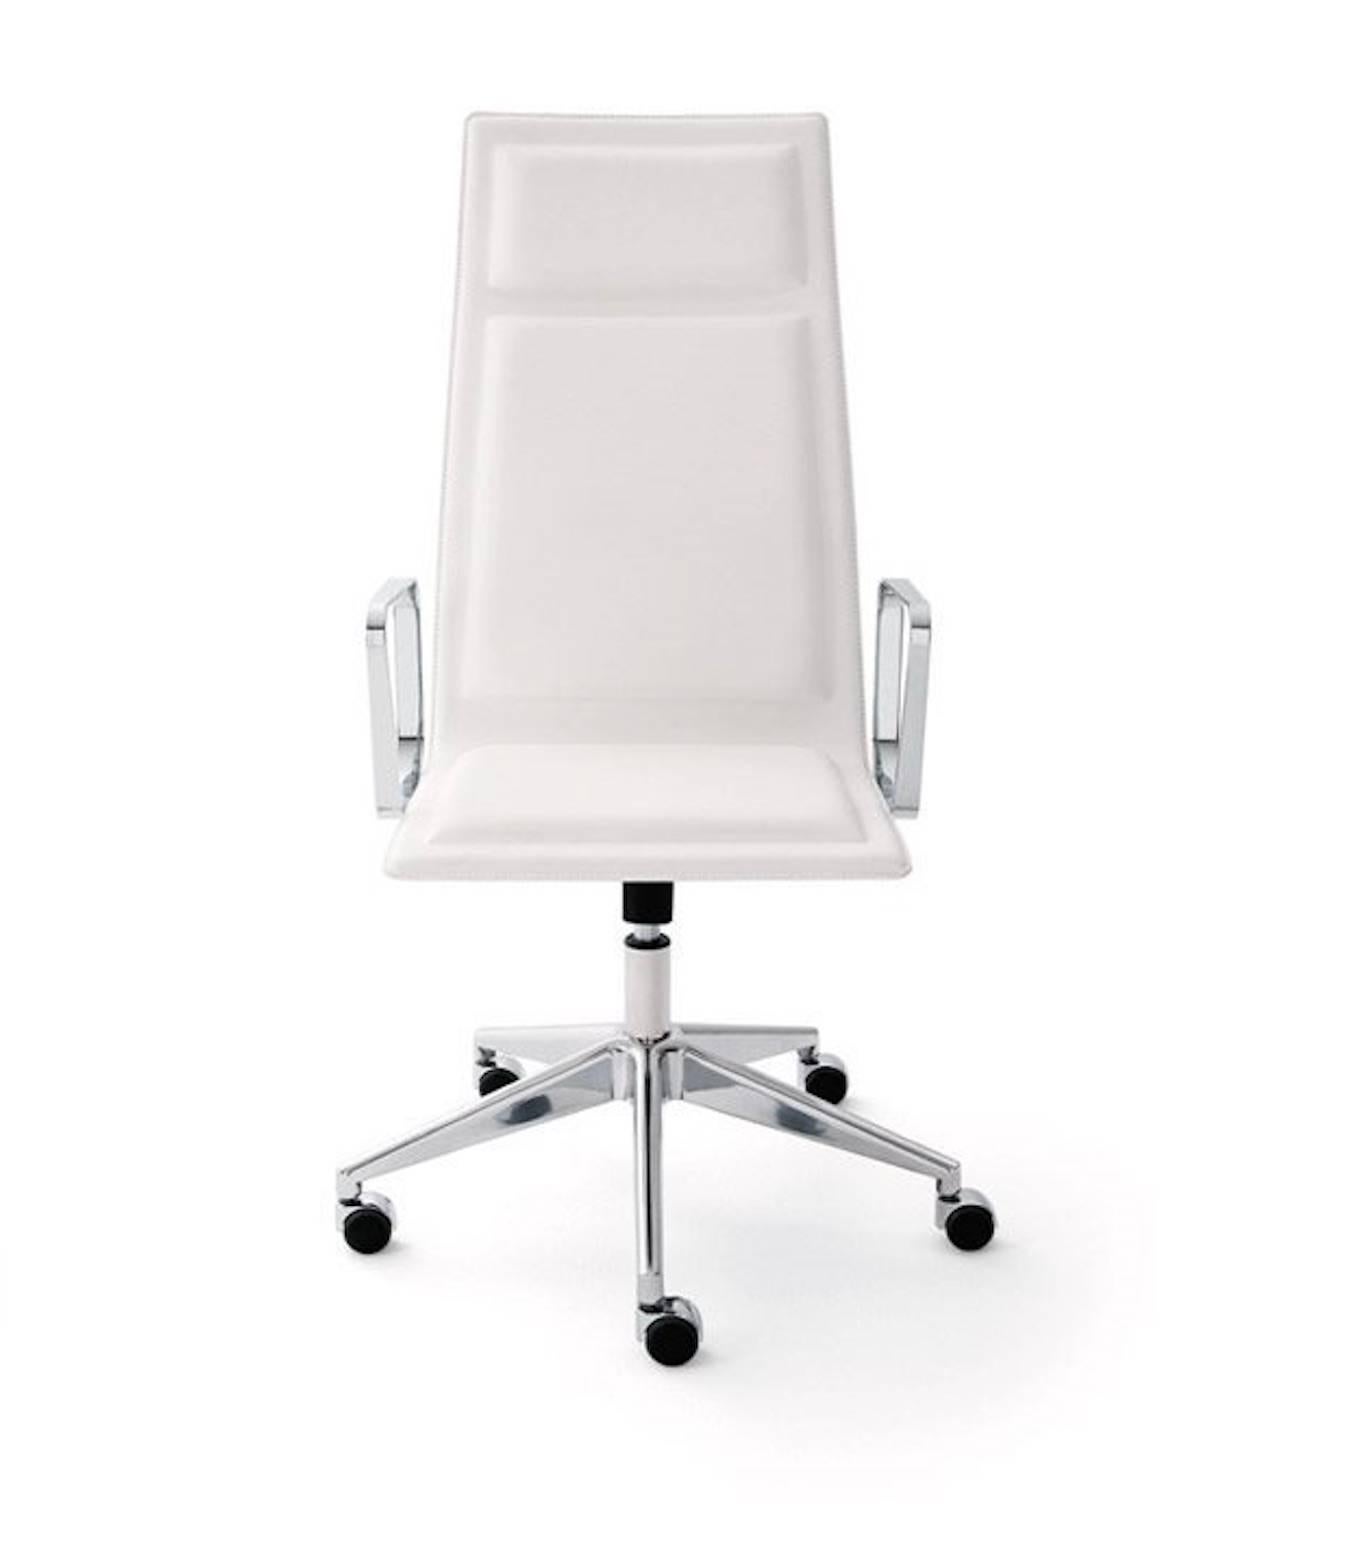 Ergonomic and elegant office chair. 

Upholstered seat covered with suede or eco-leather as per samples. 

Three different heights for backrest. Swivel five-star base made of die-cast aluminium. Gas lift height adjustment, with castors or feet.